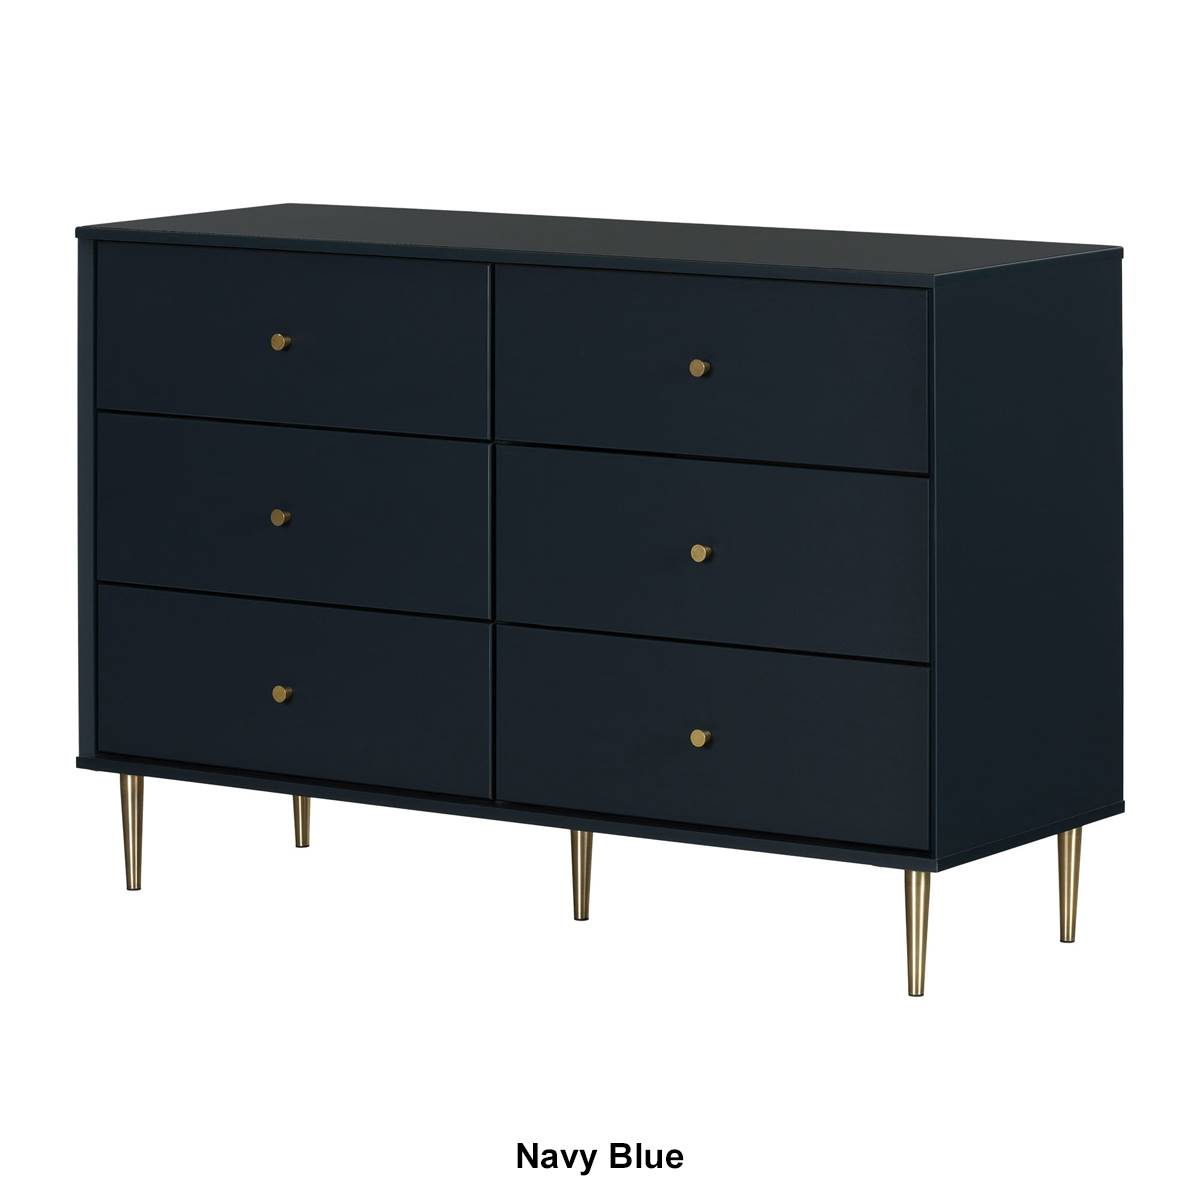 South Shore Dylane 6-Drawer Double Dresser